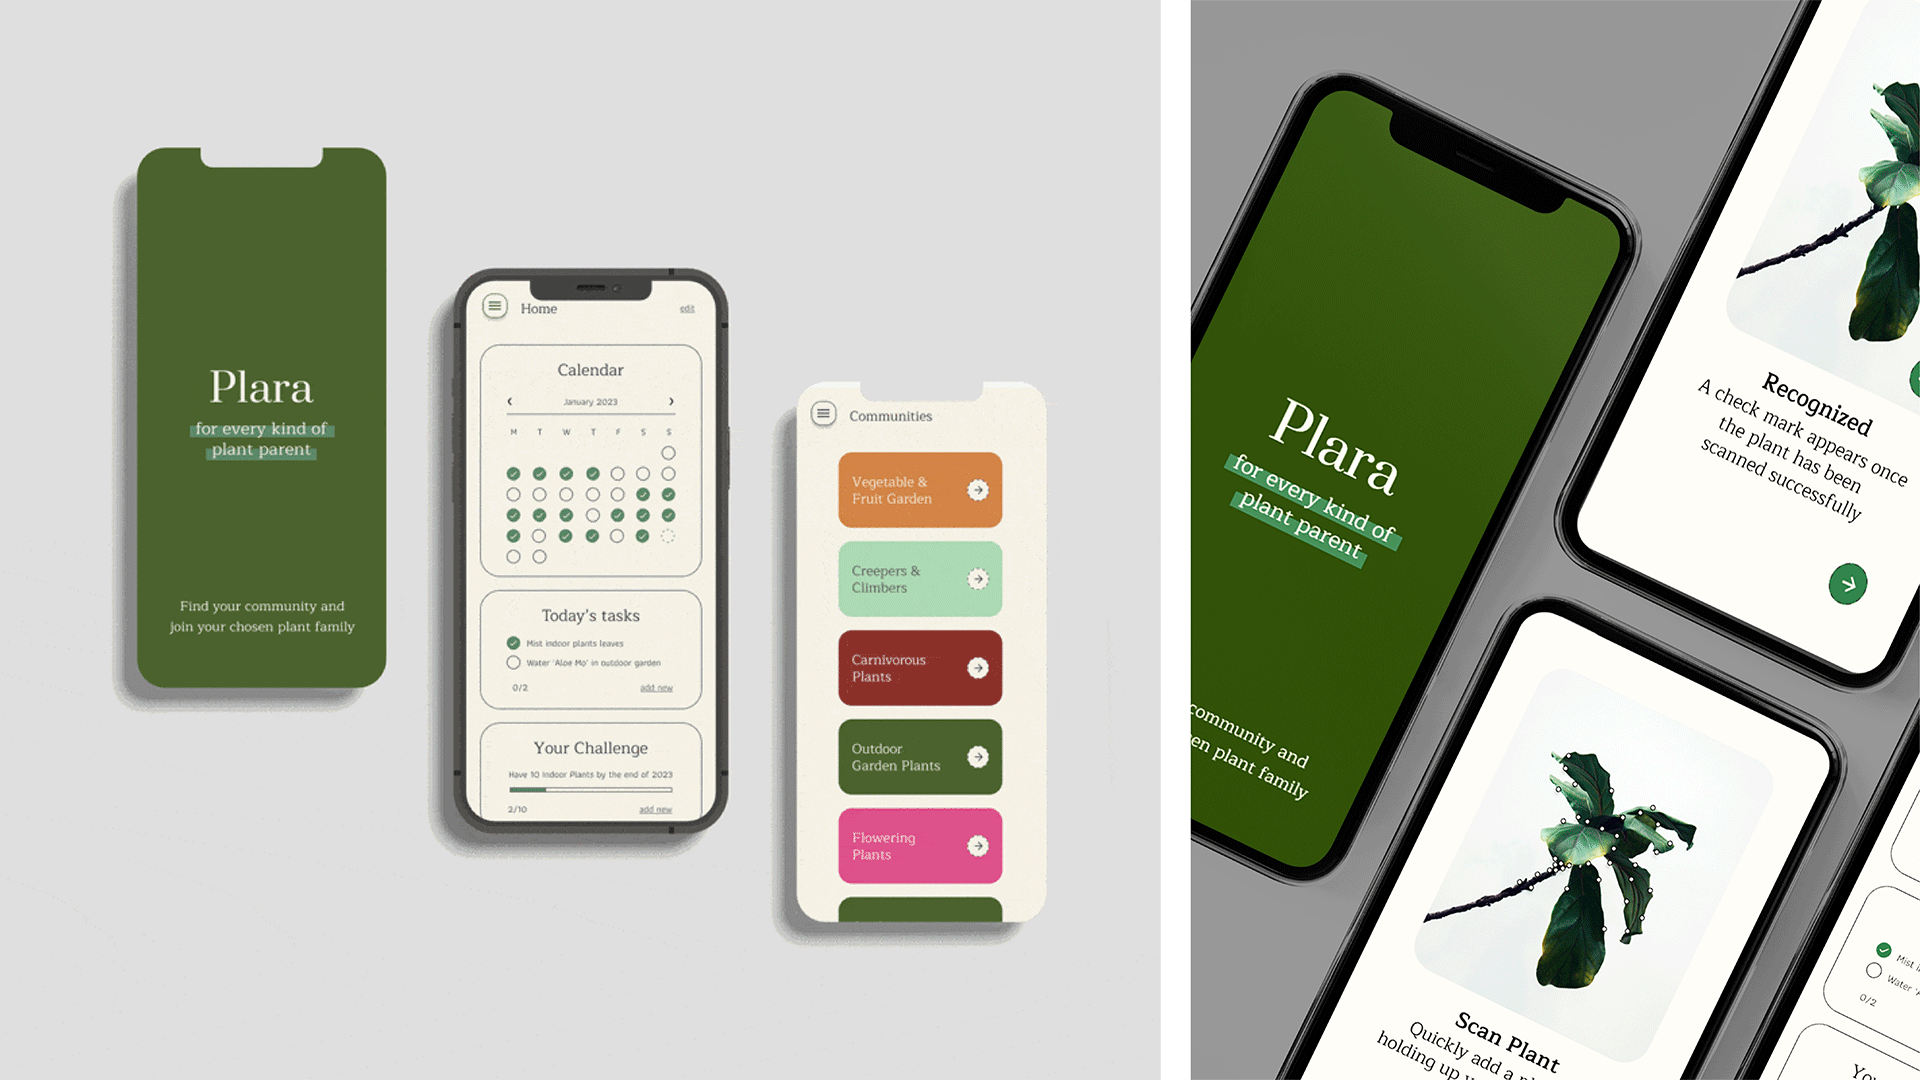 App screens on a white background with three phones displaying different phone screens. On the right, a picture of phones displaying the app screens.